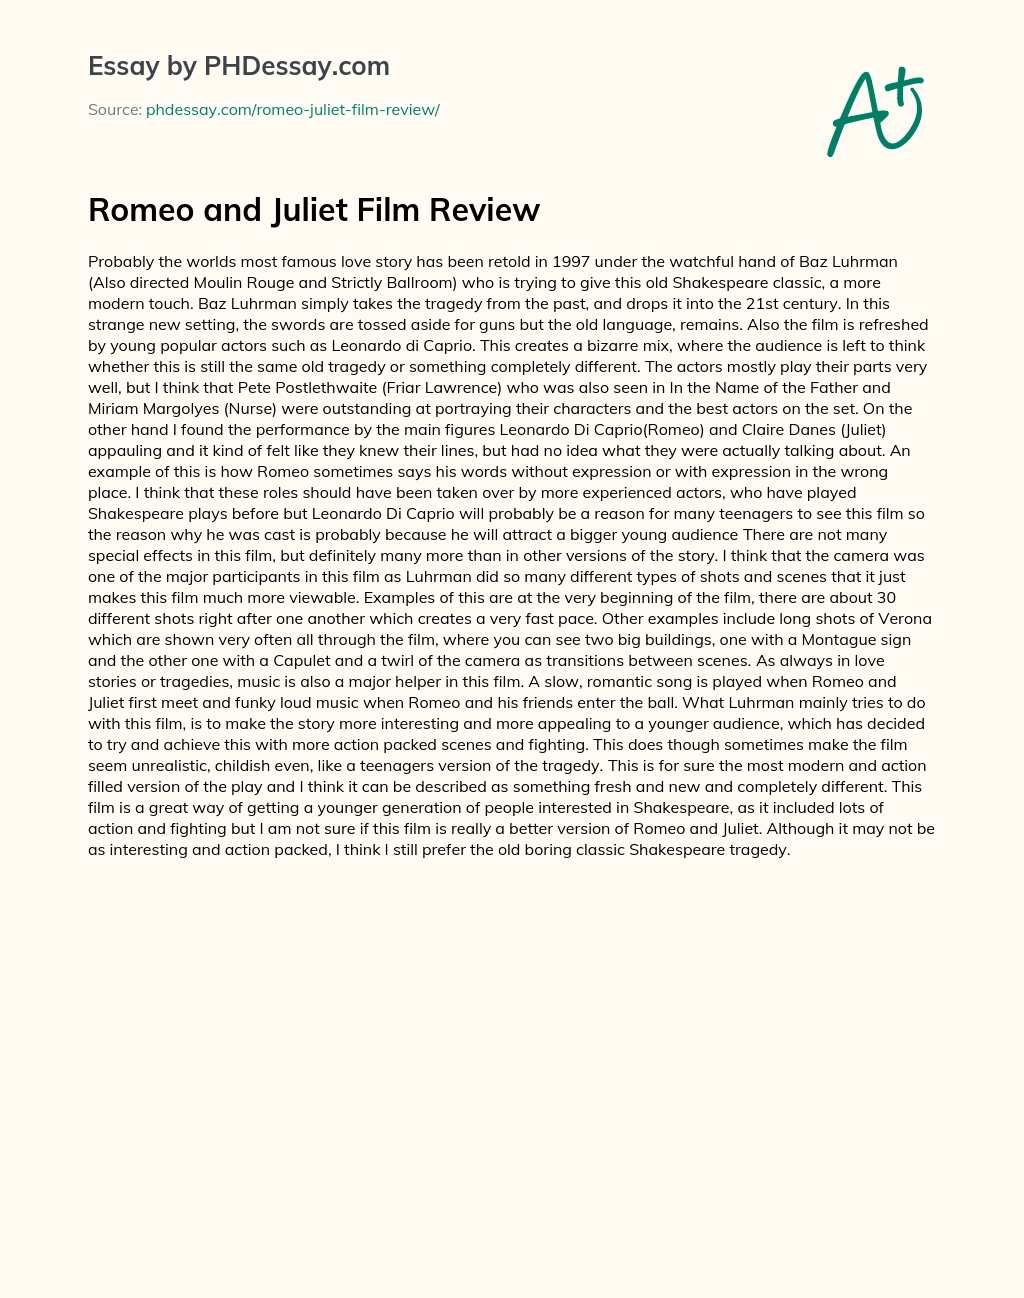 Romeo and Juliet Film Review essay